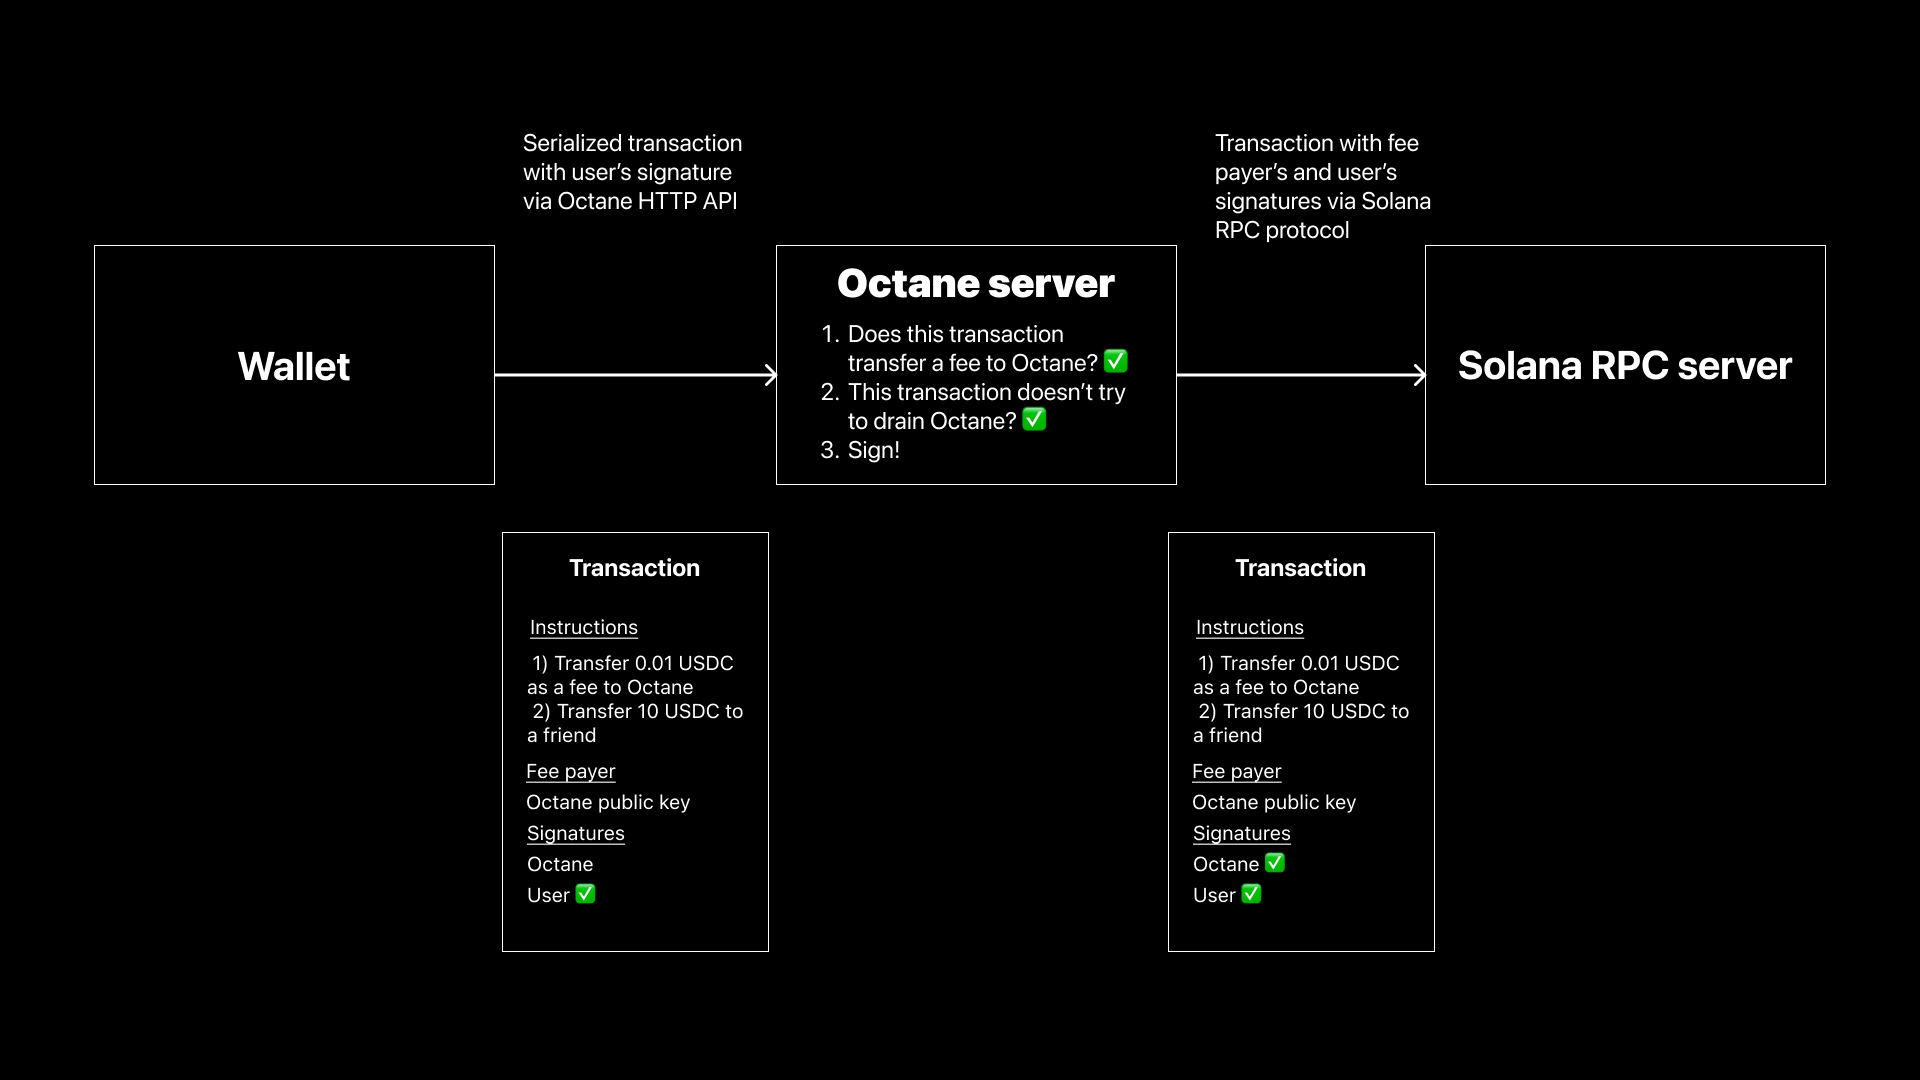 Overview of Octane architecture